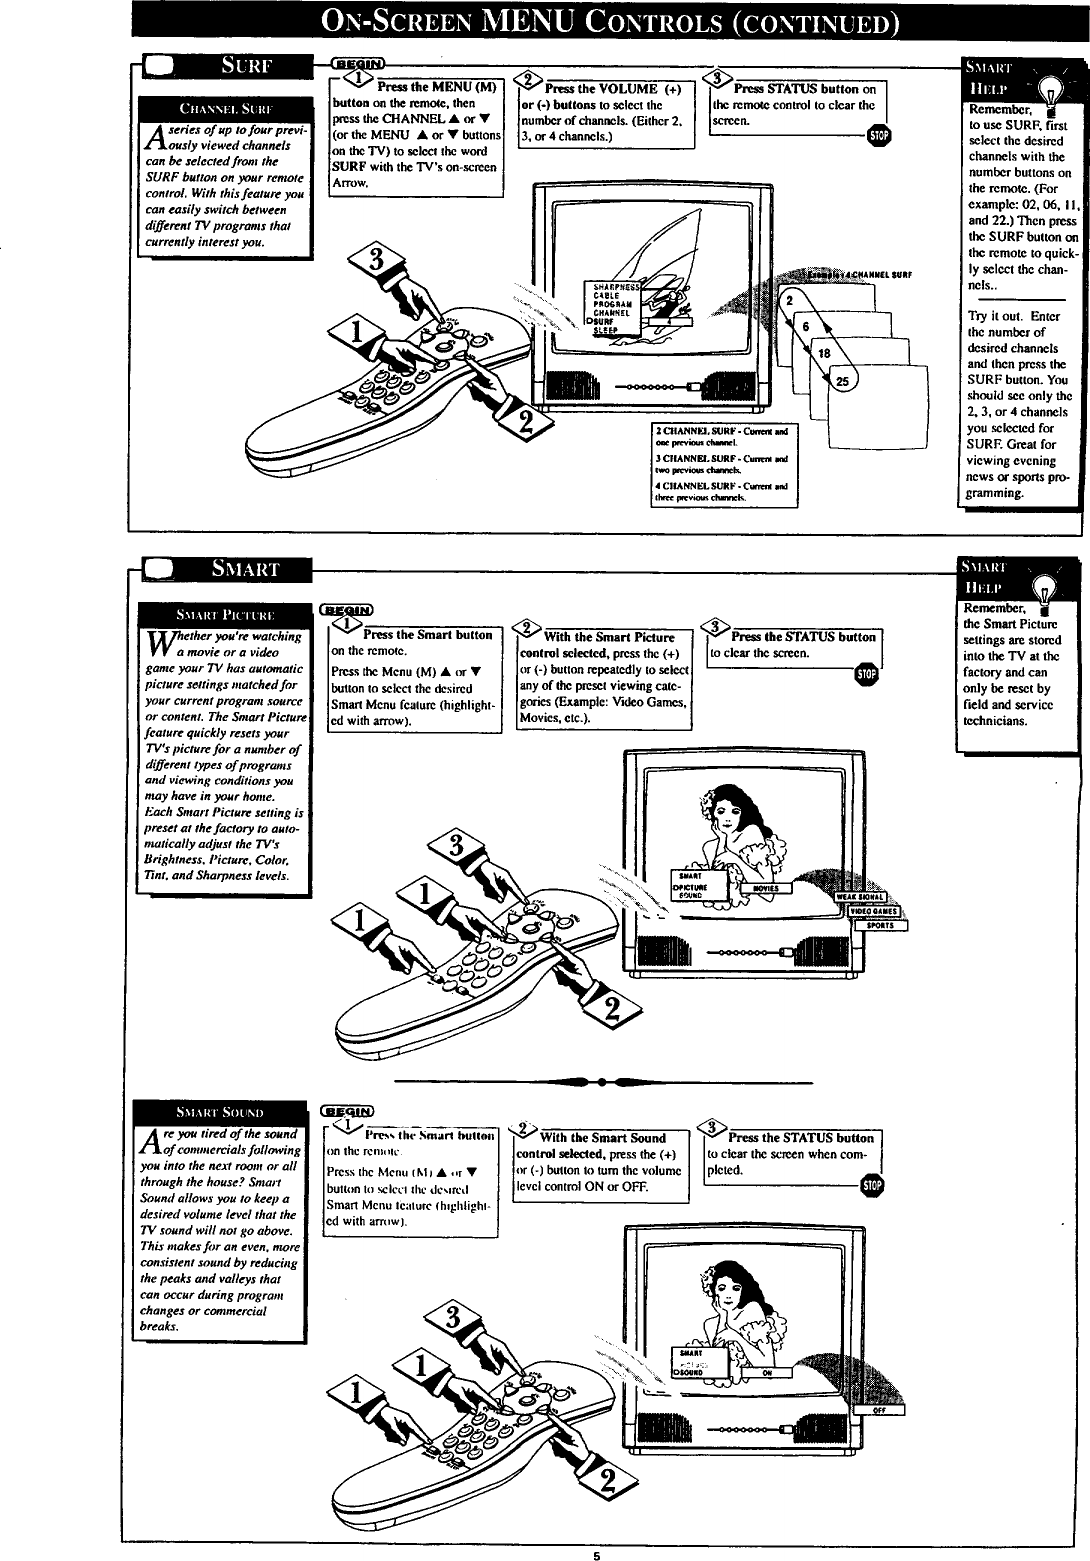 Page 5 of 8 - MAGNAVOX  Direct View Digital 27 To 40 TV Manual 97100190